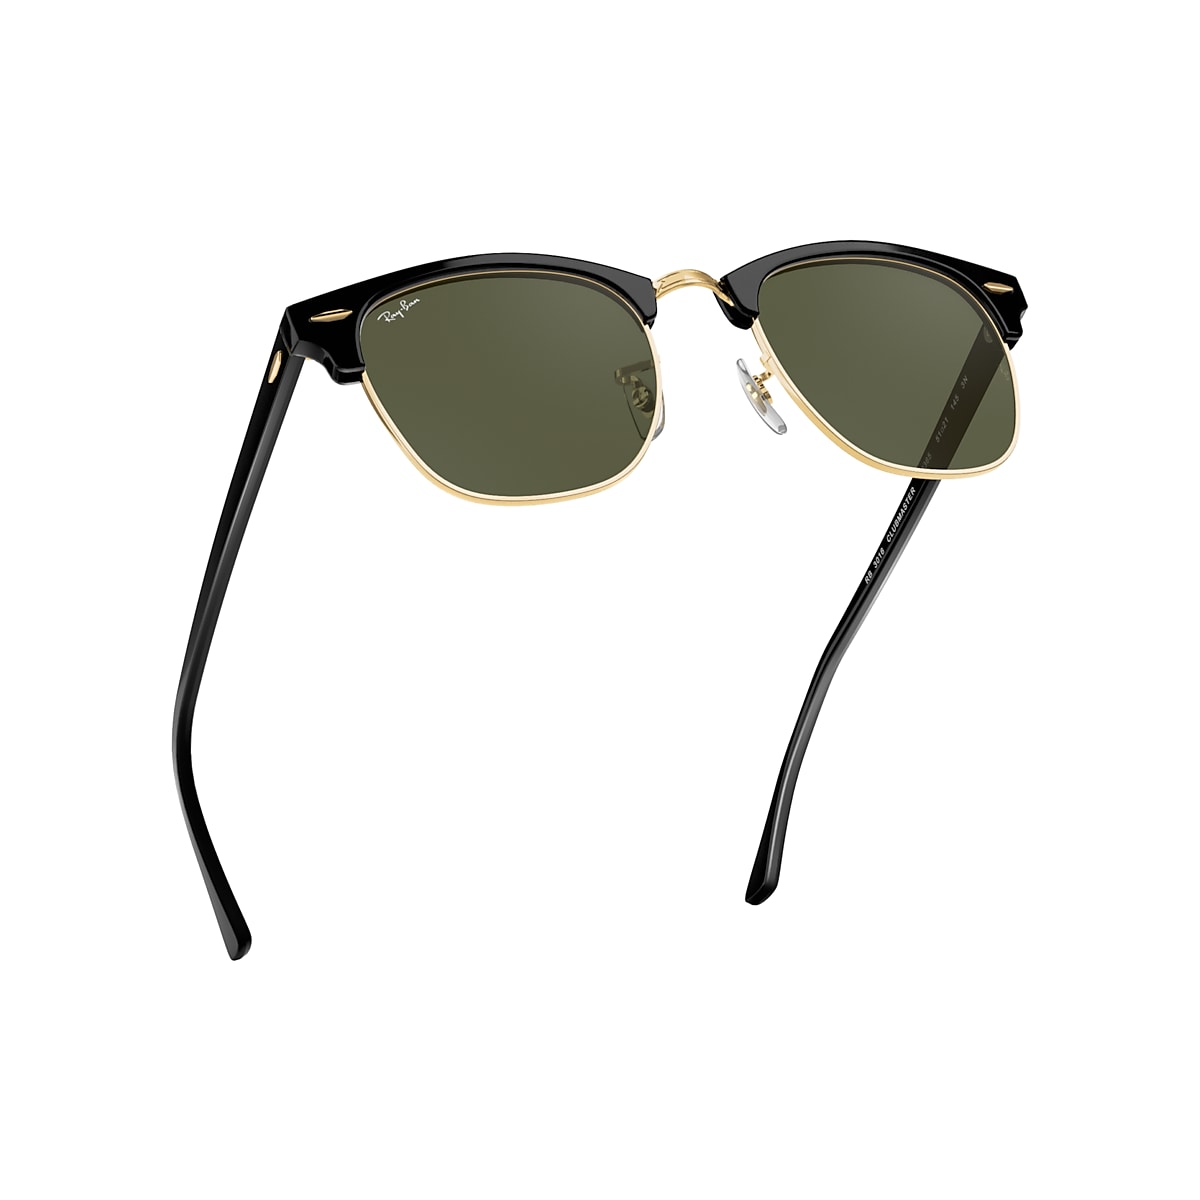 CLUBMASTER CLASSIC Sunglasses in Black On Gold and Green - RB3016 | Ray-Ban®  US